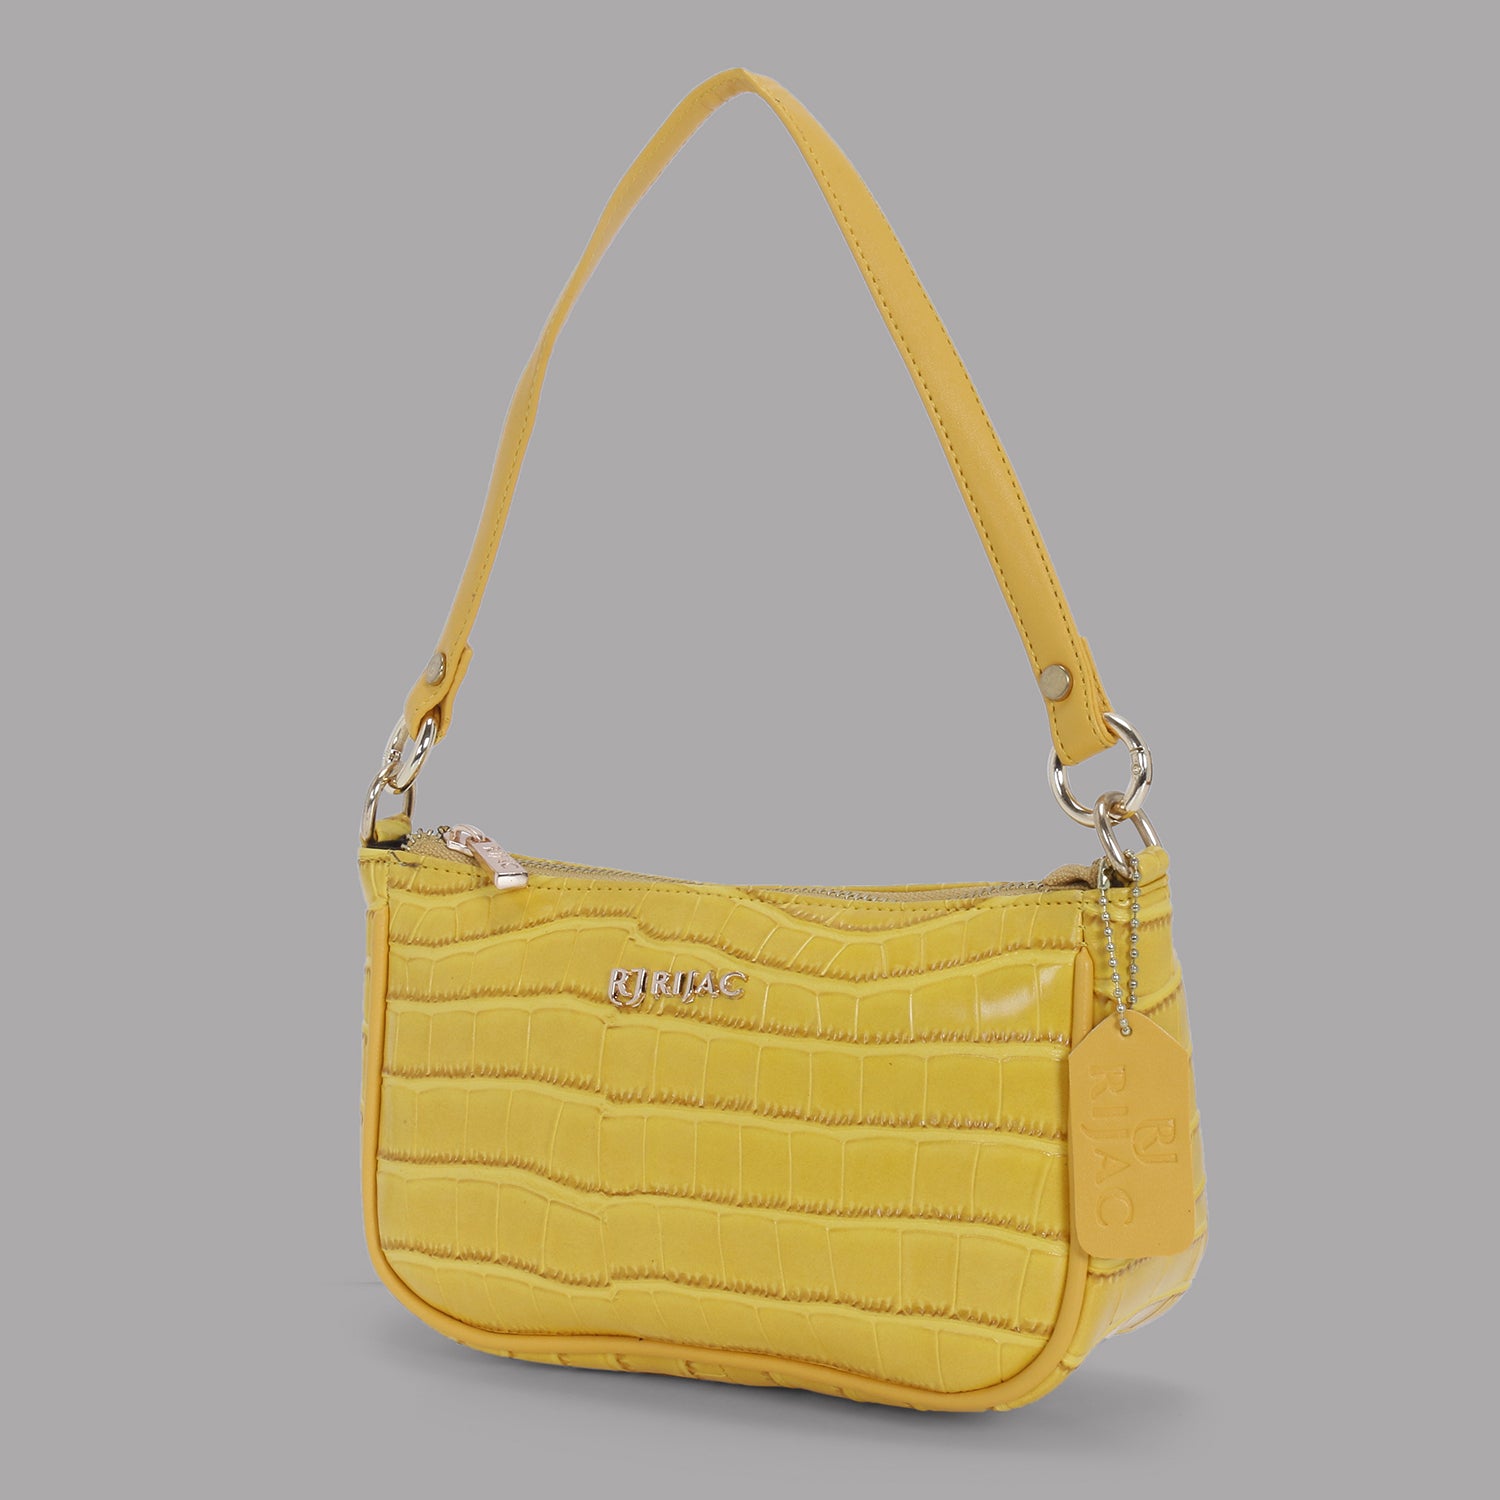 YELLOW SOLEIL DUAL PARTY SLING BAG